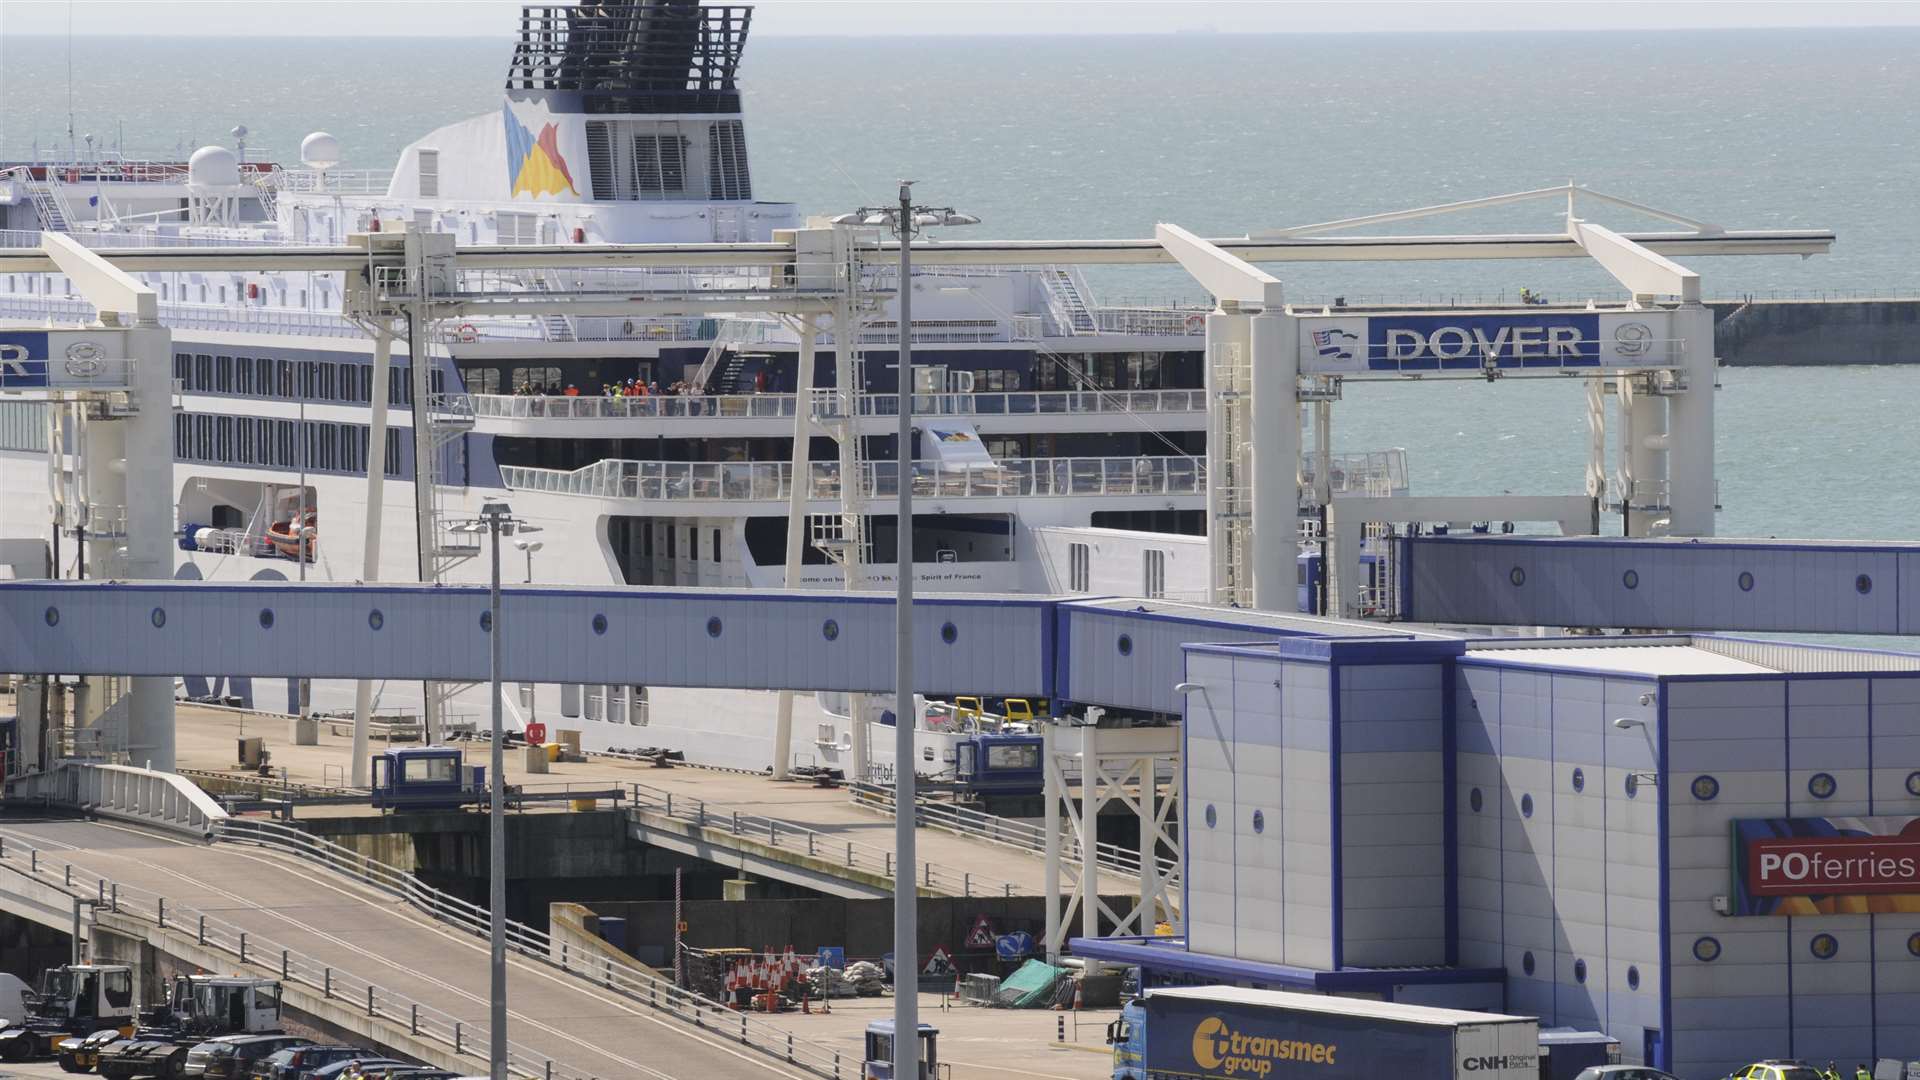 There are fears of delays at Dover Docks due to Brexit